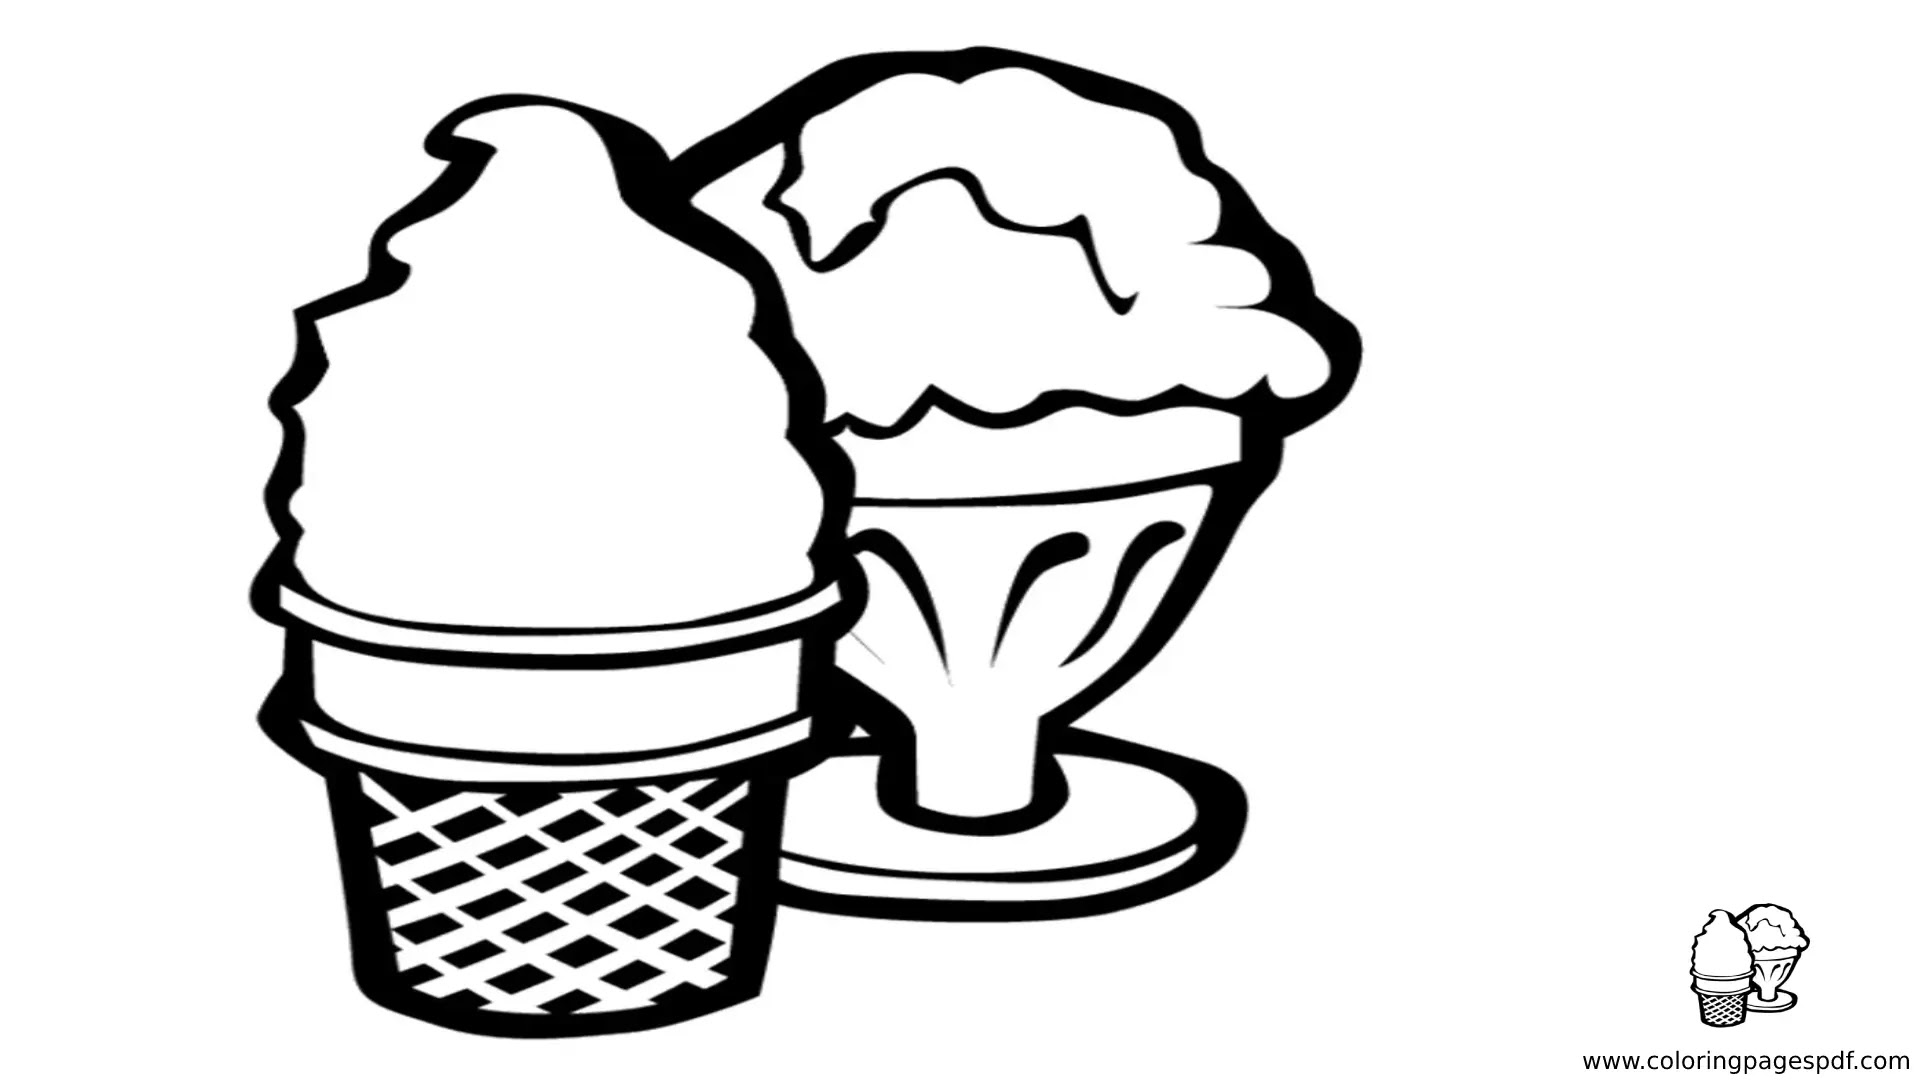 Coloring Pages Of Ice Cream Cone And Cup